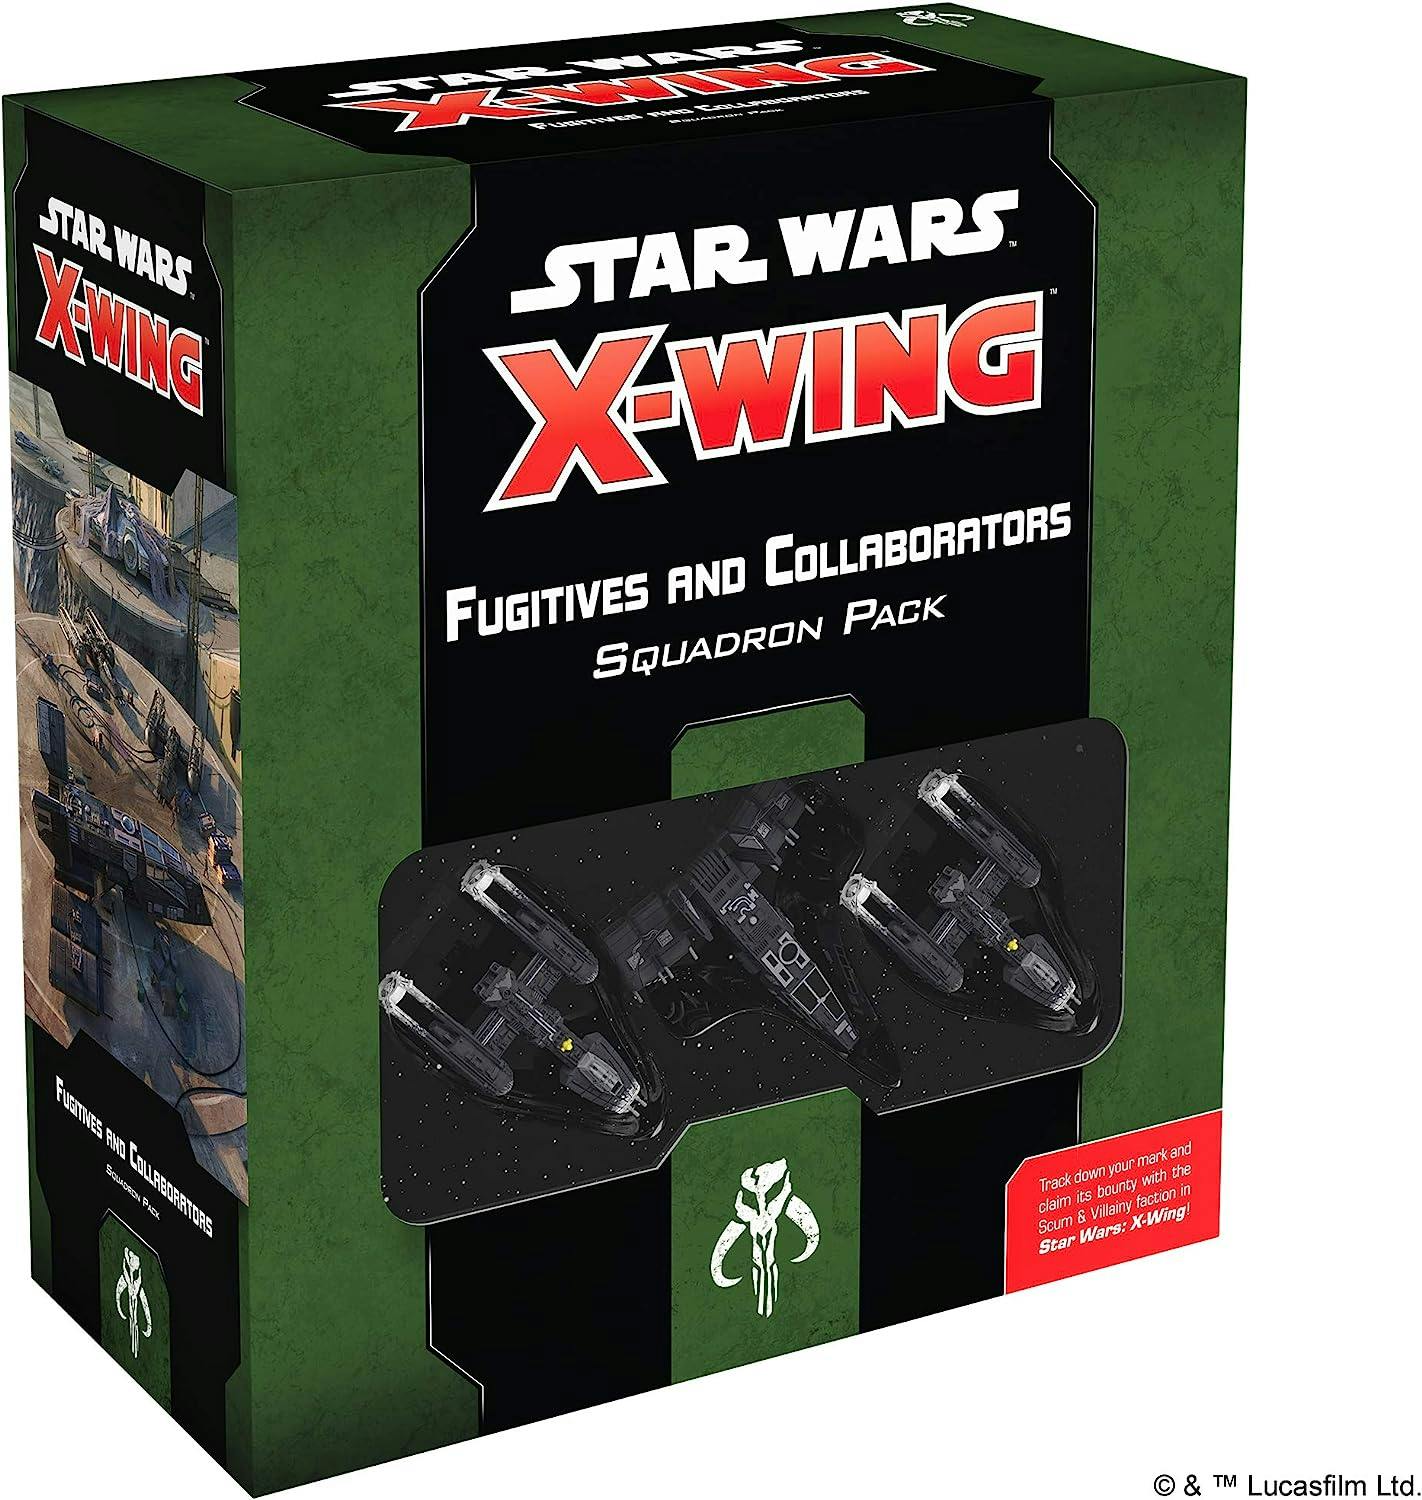 Star Wars X-Wing Miniatures Game: Fugitives and Collaborators SQUADRON PACK